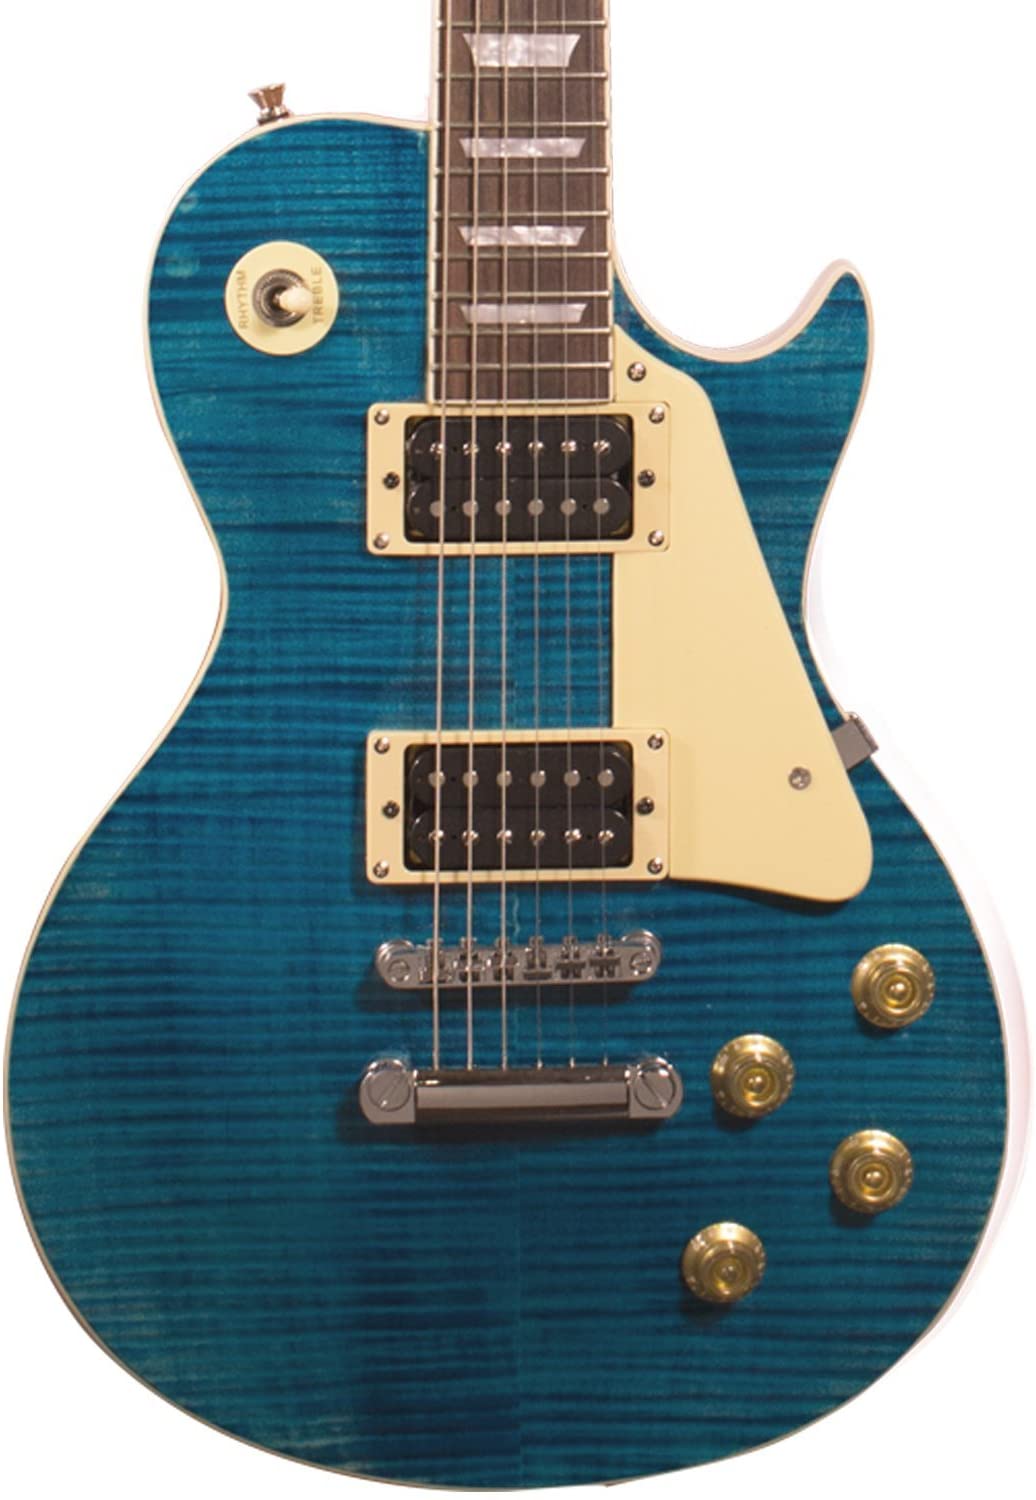 Sawtooth Heritage Series Flame Maple Top Electric Guitar, Cali Blue Flame